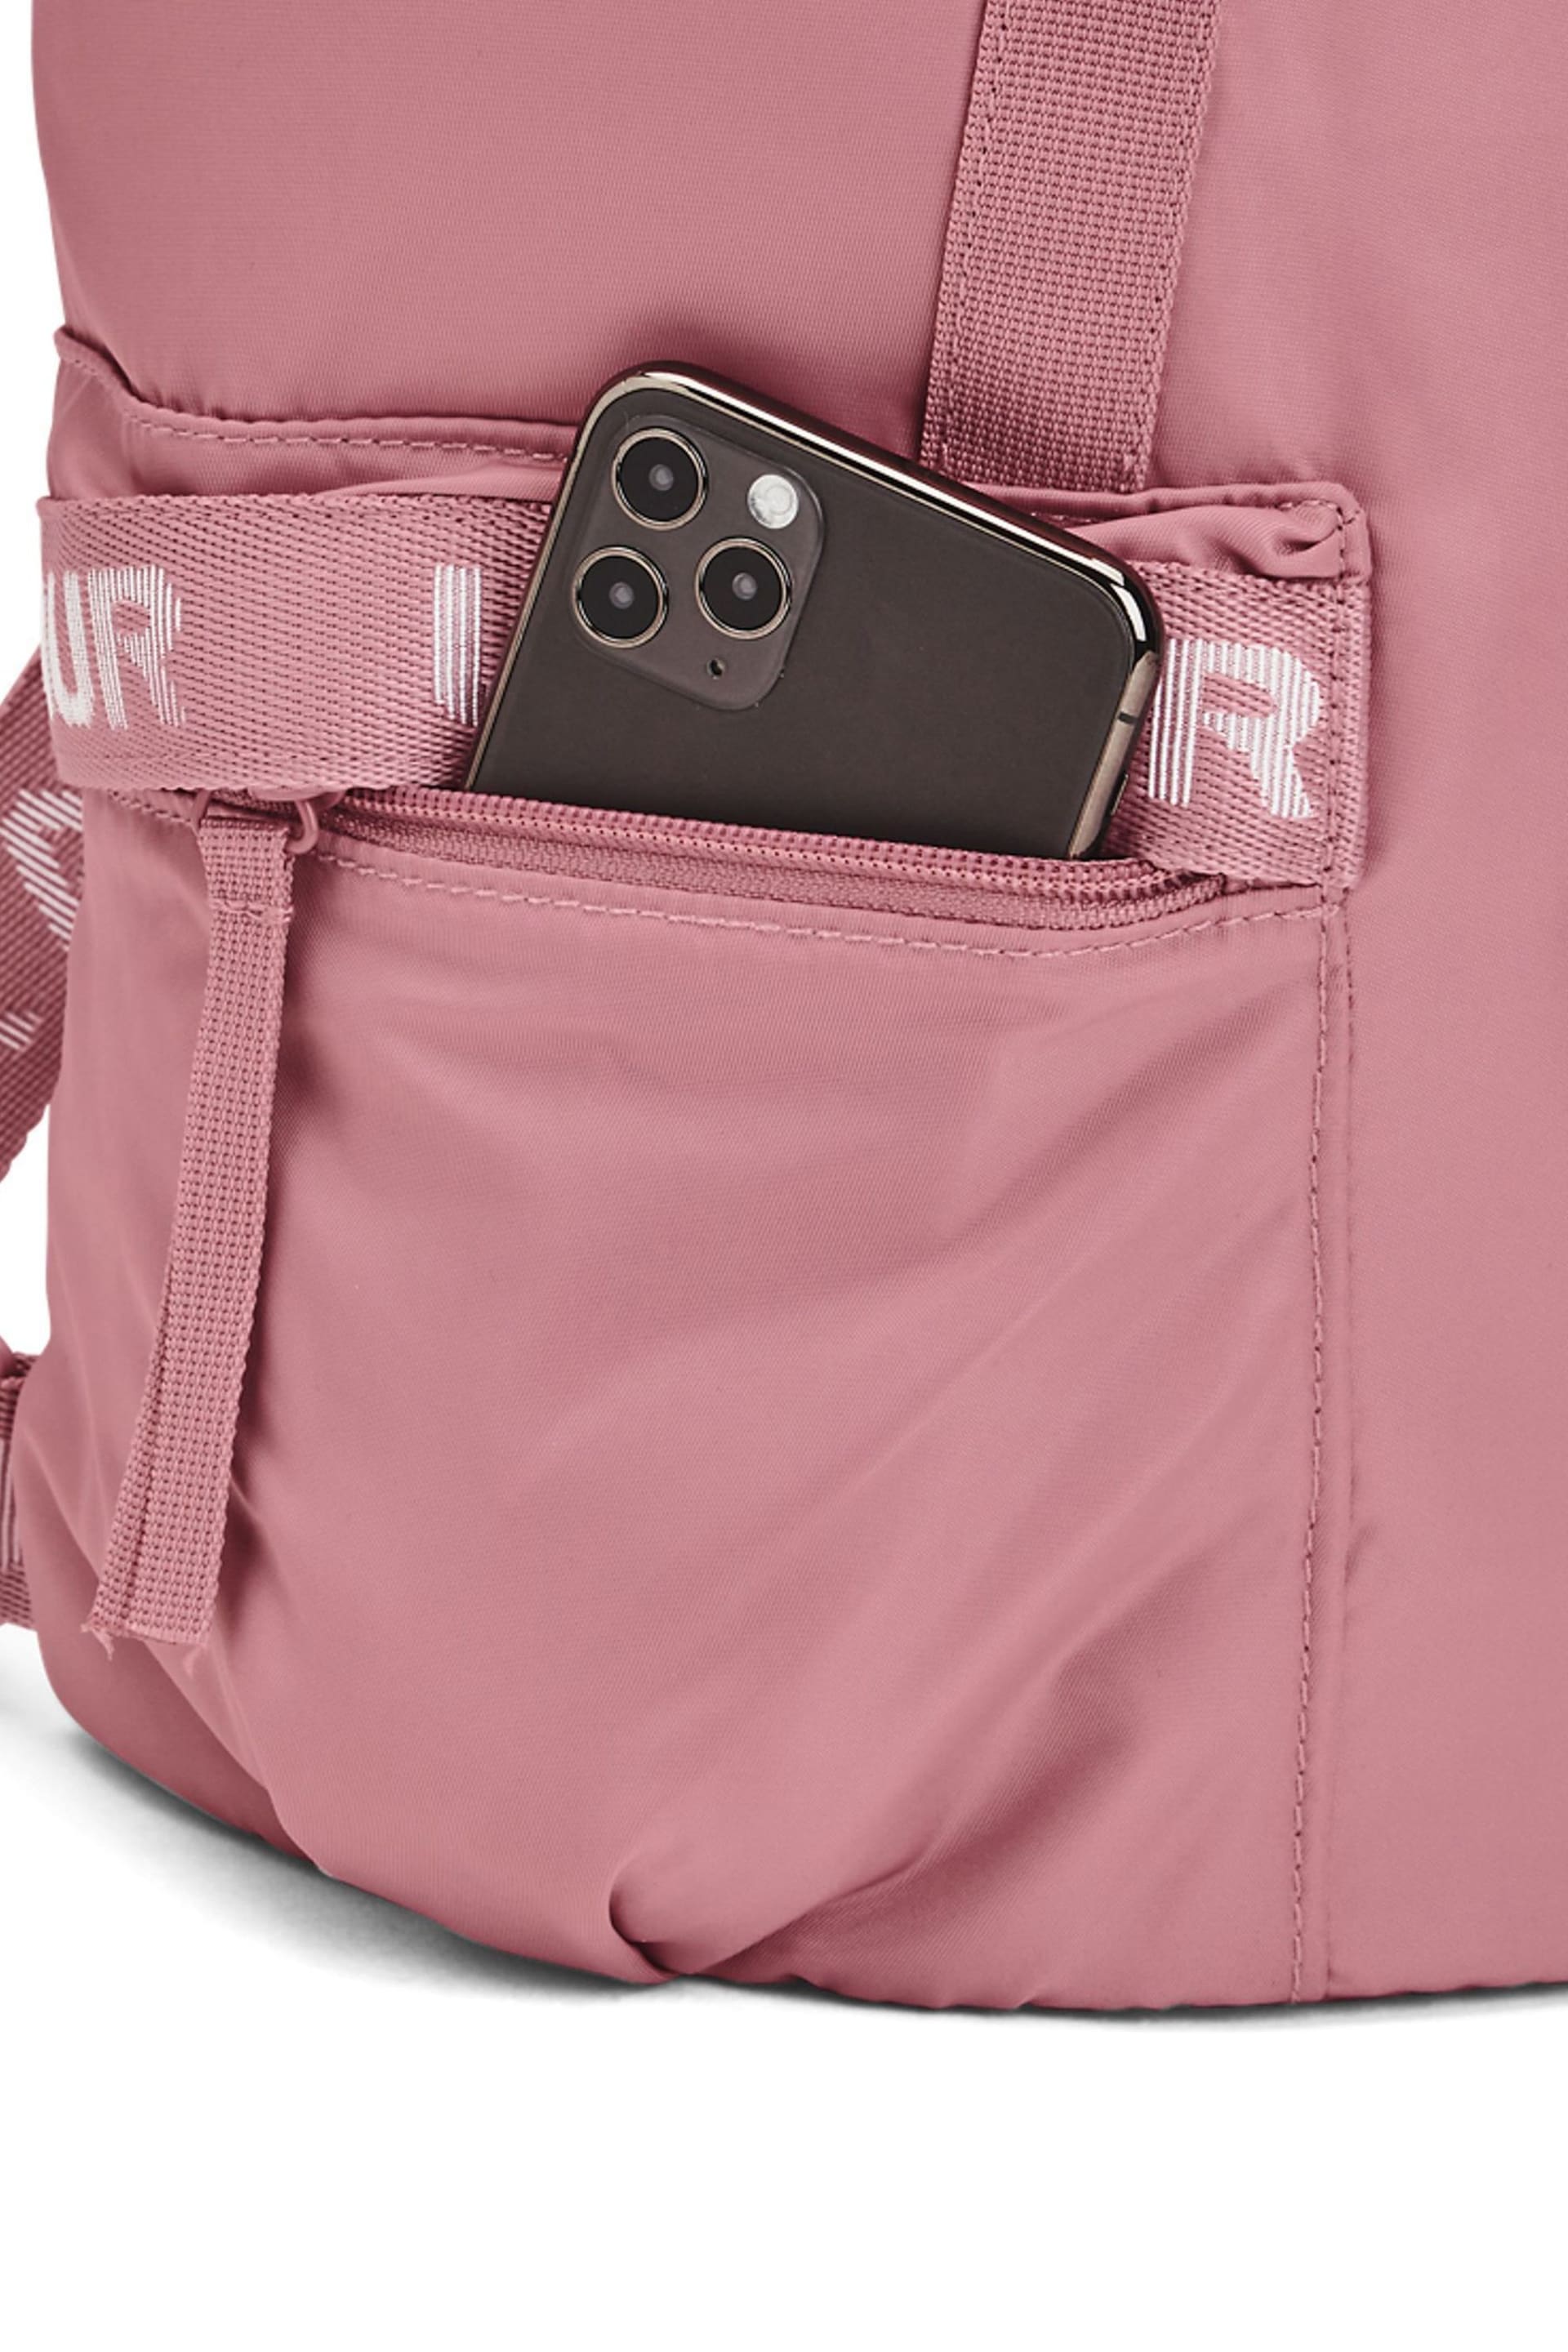 Under Armour Pink Favorite Backpack - Image 6 of 6